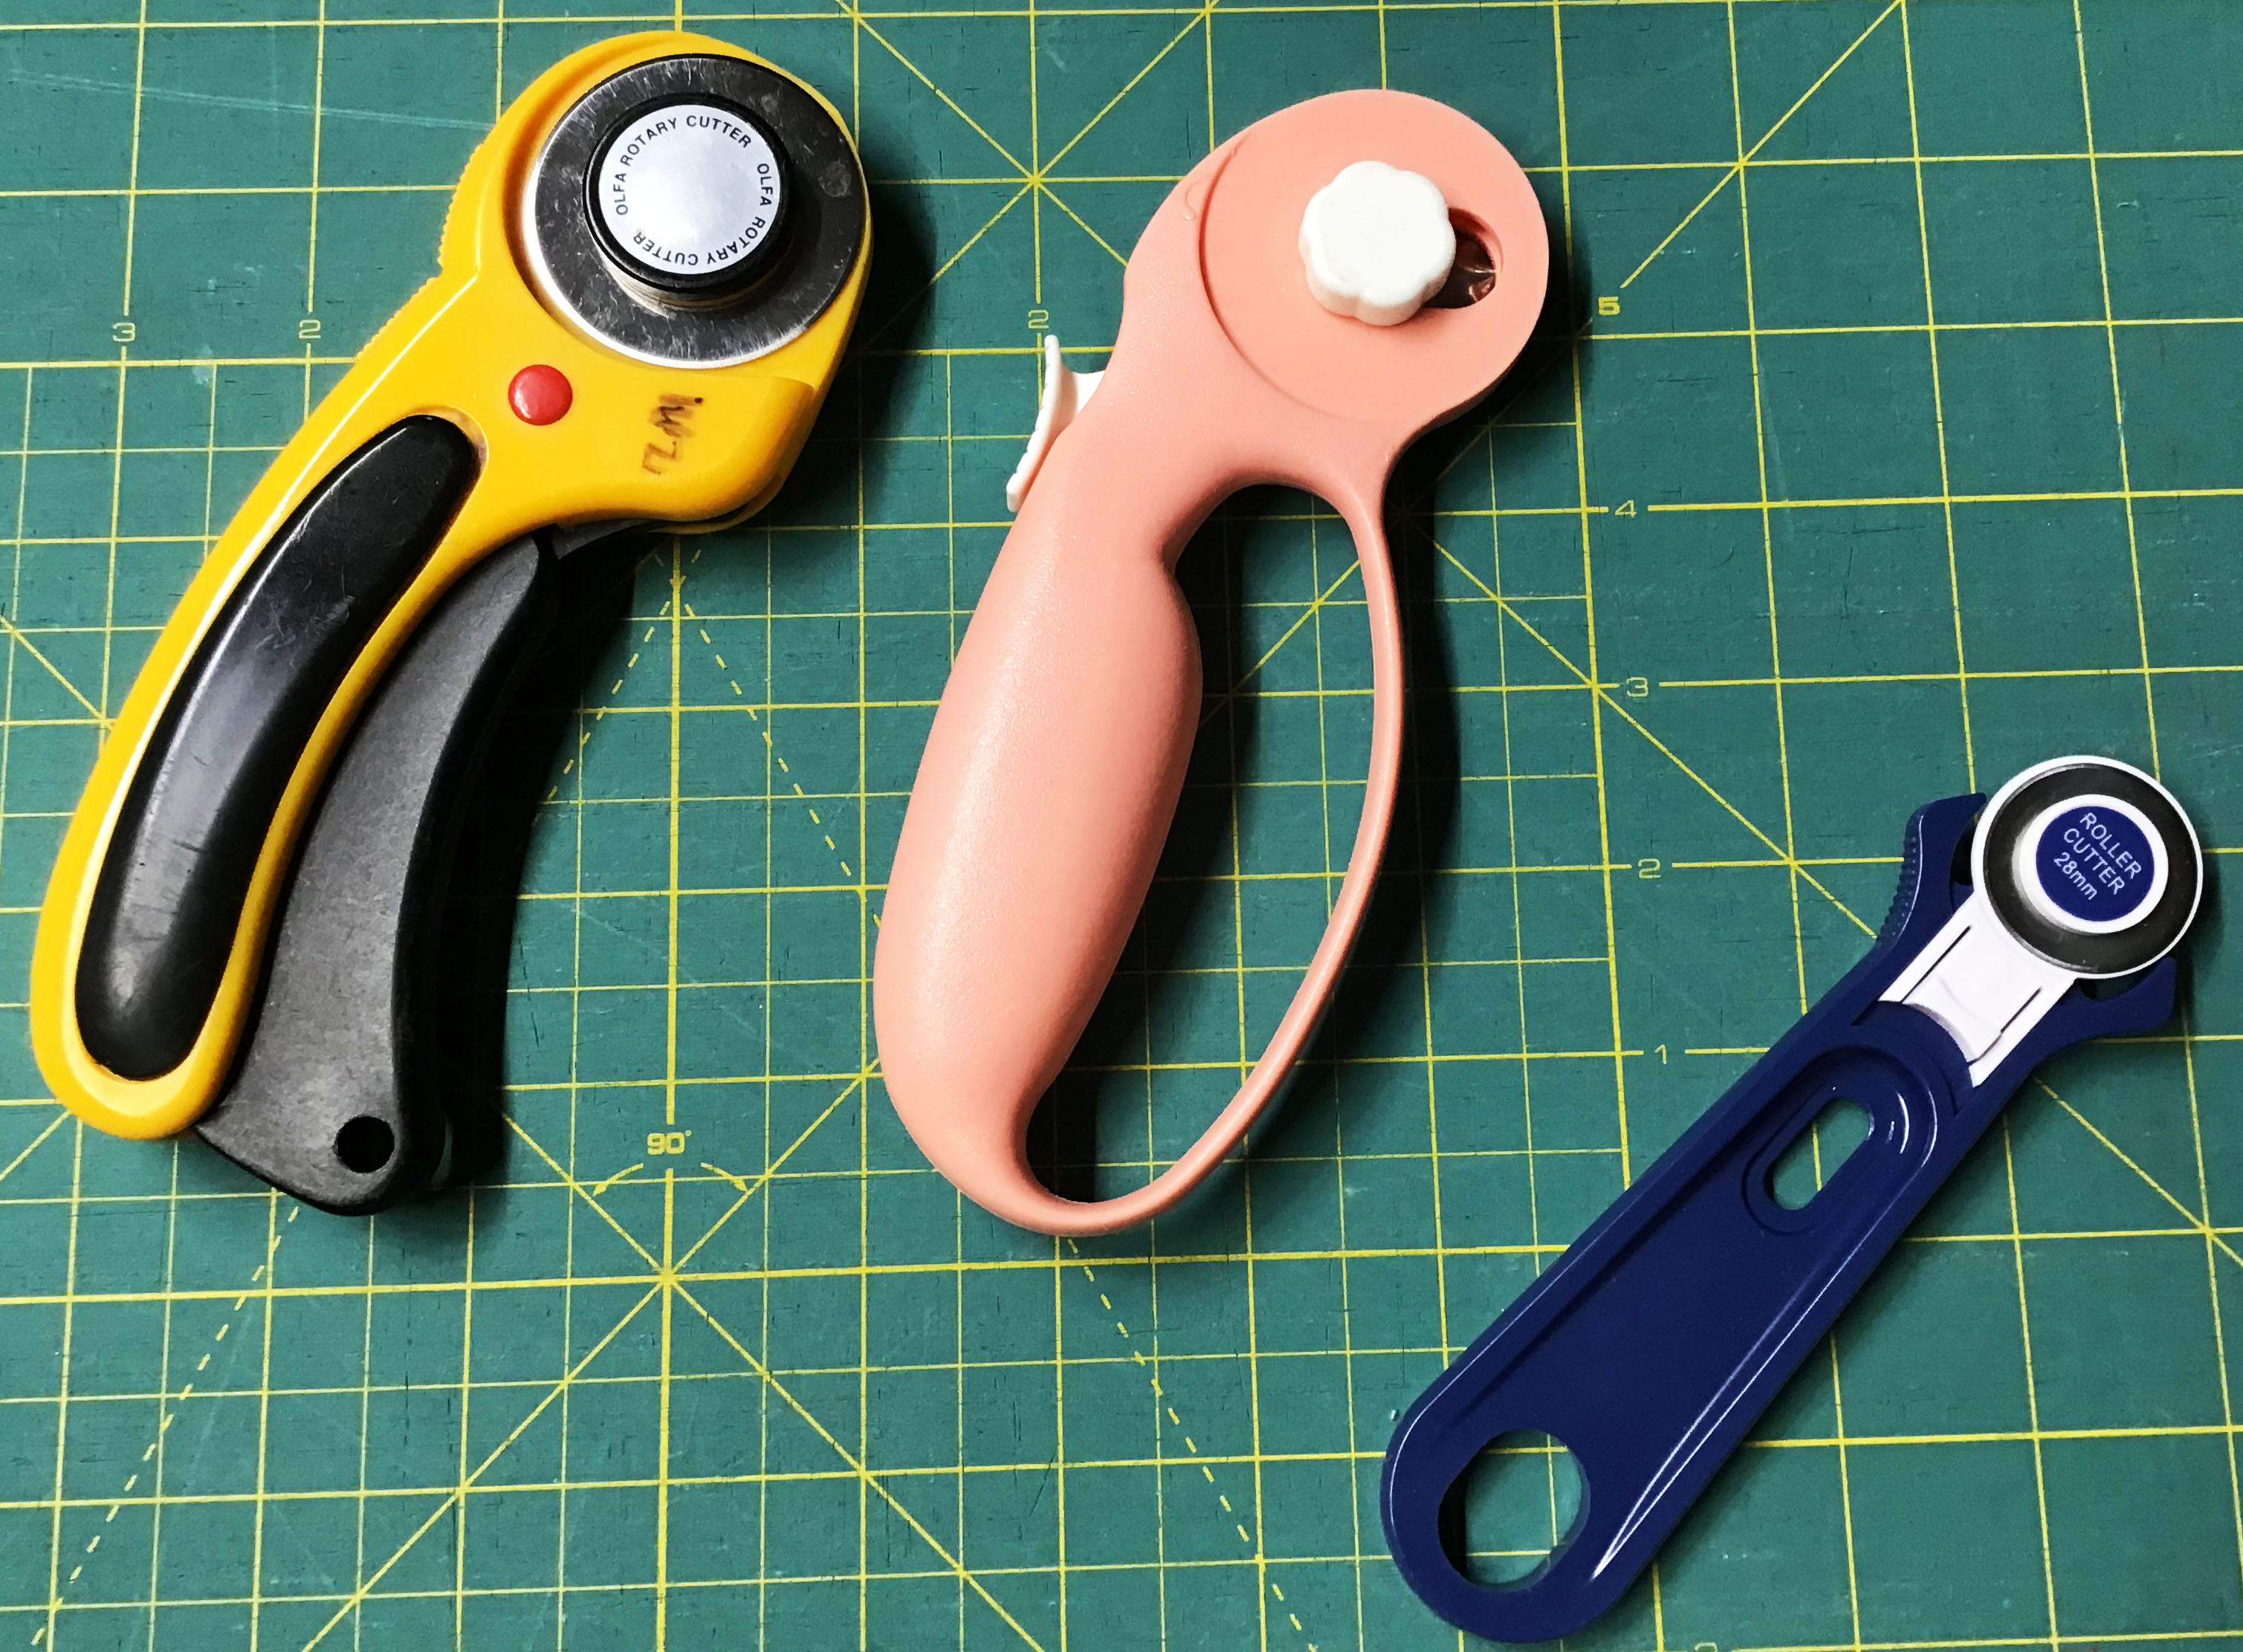 Rotary cutter recommendation sewing discussion topic